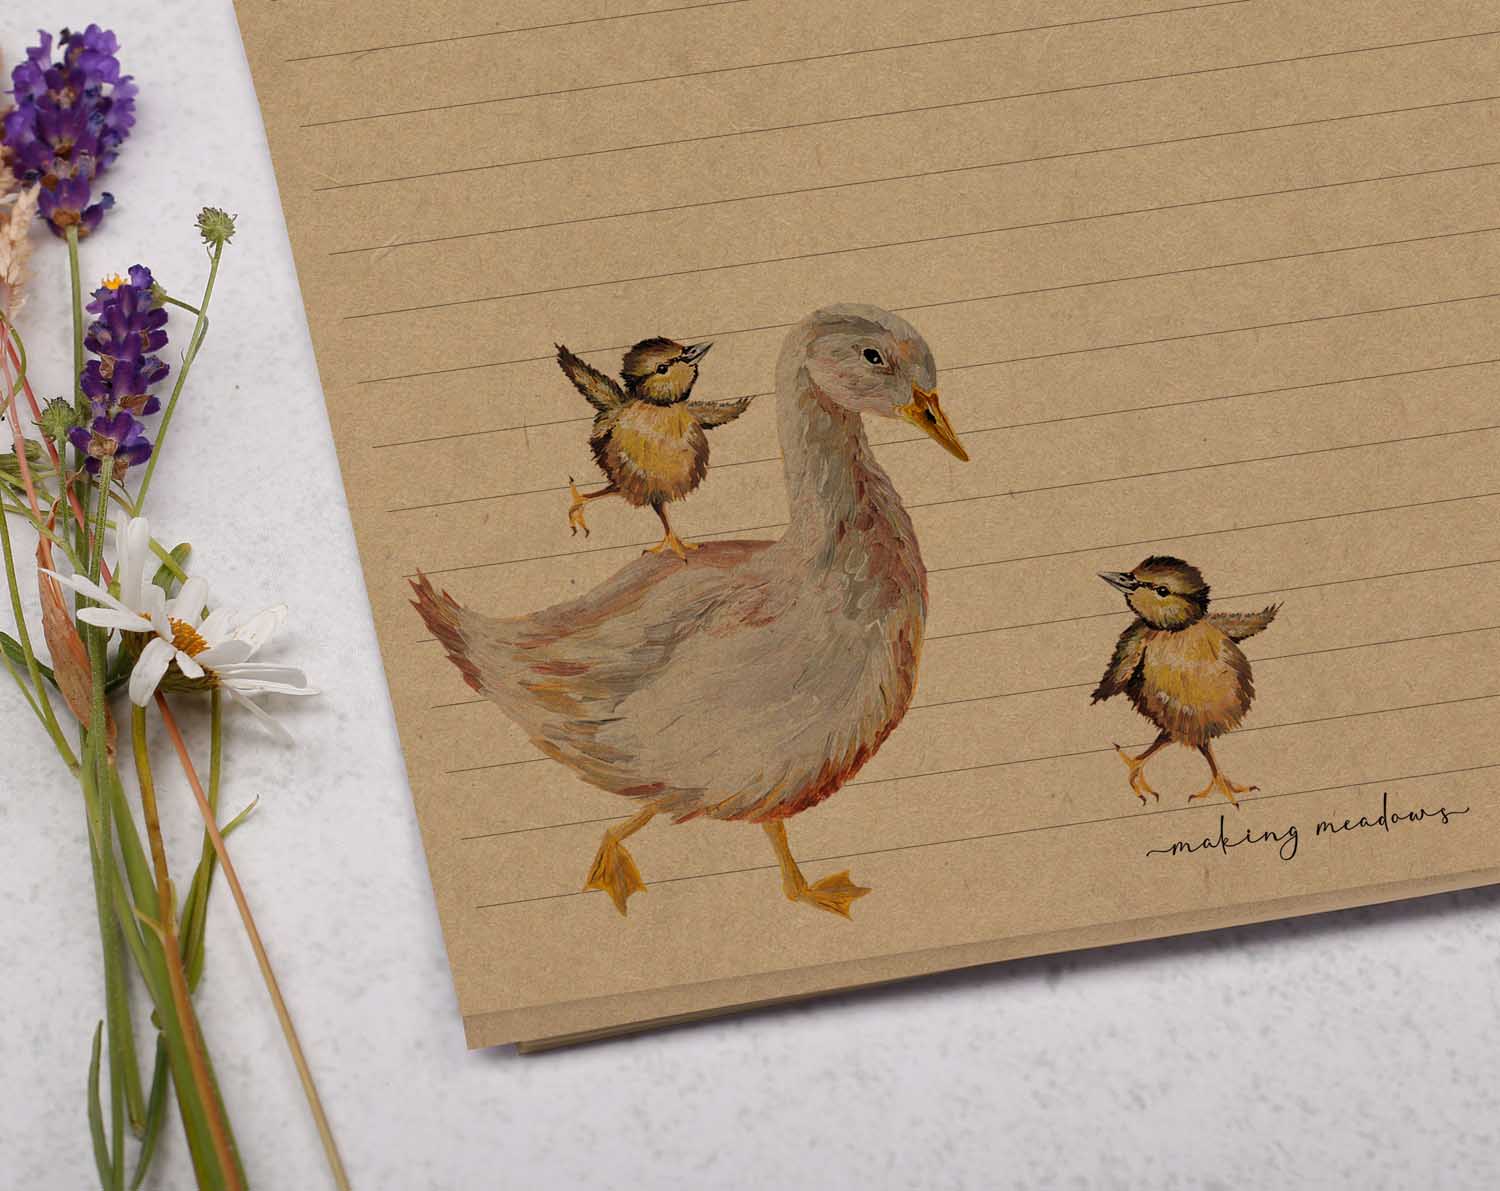 A4 Kraft letter writing paper sheets with a cute goose and her baby chicks